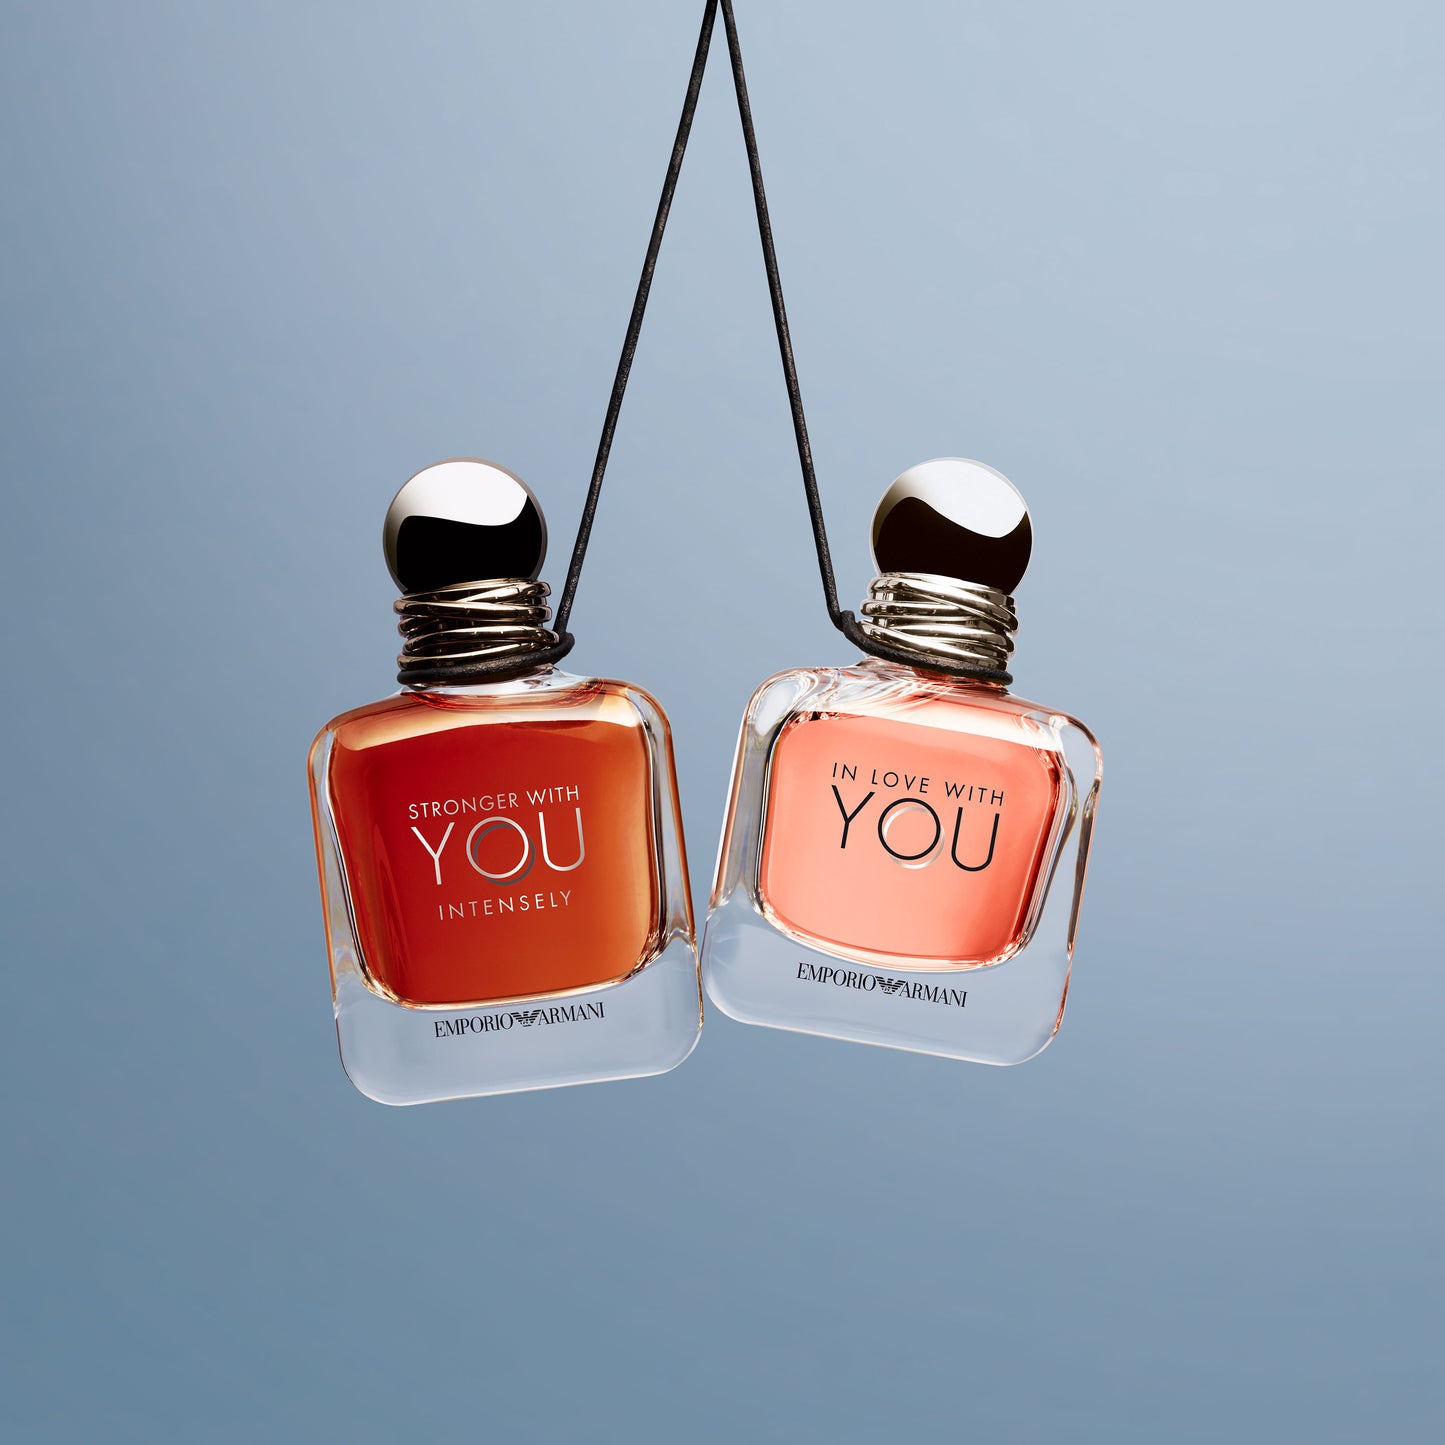 EMPORIO ARMANI Stronger with You Intensely